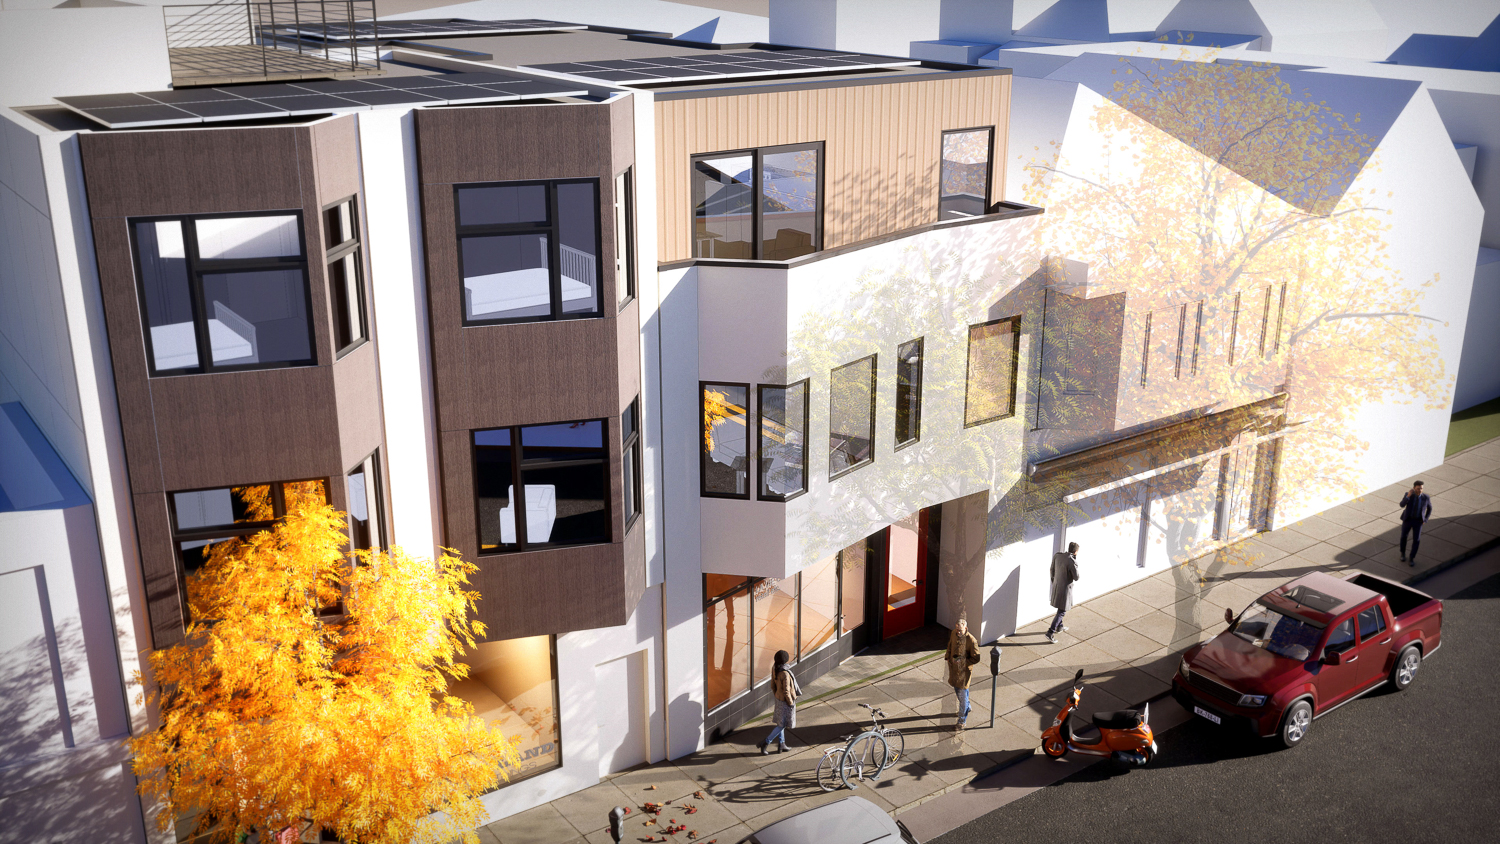 432 and 434 Cortland Avenue, rendering by DNM Architecture